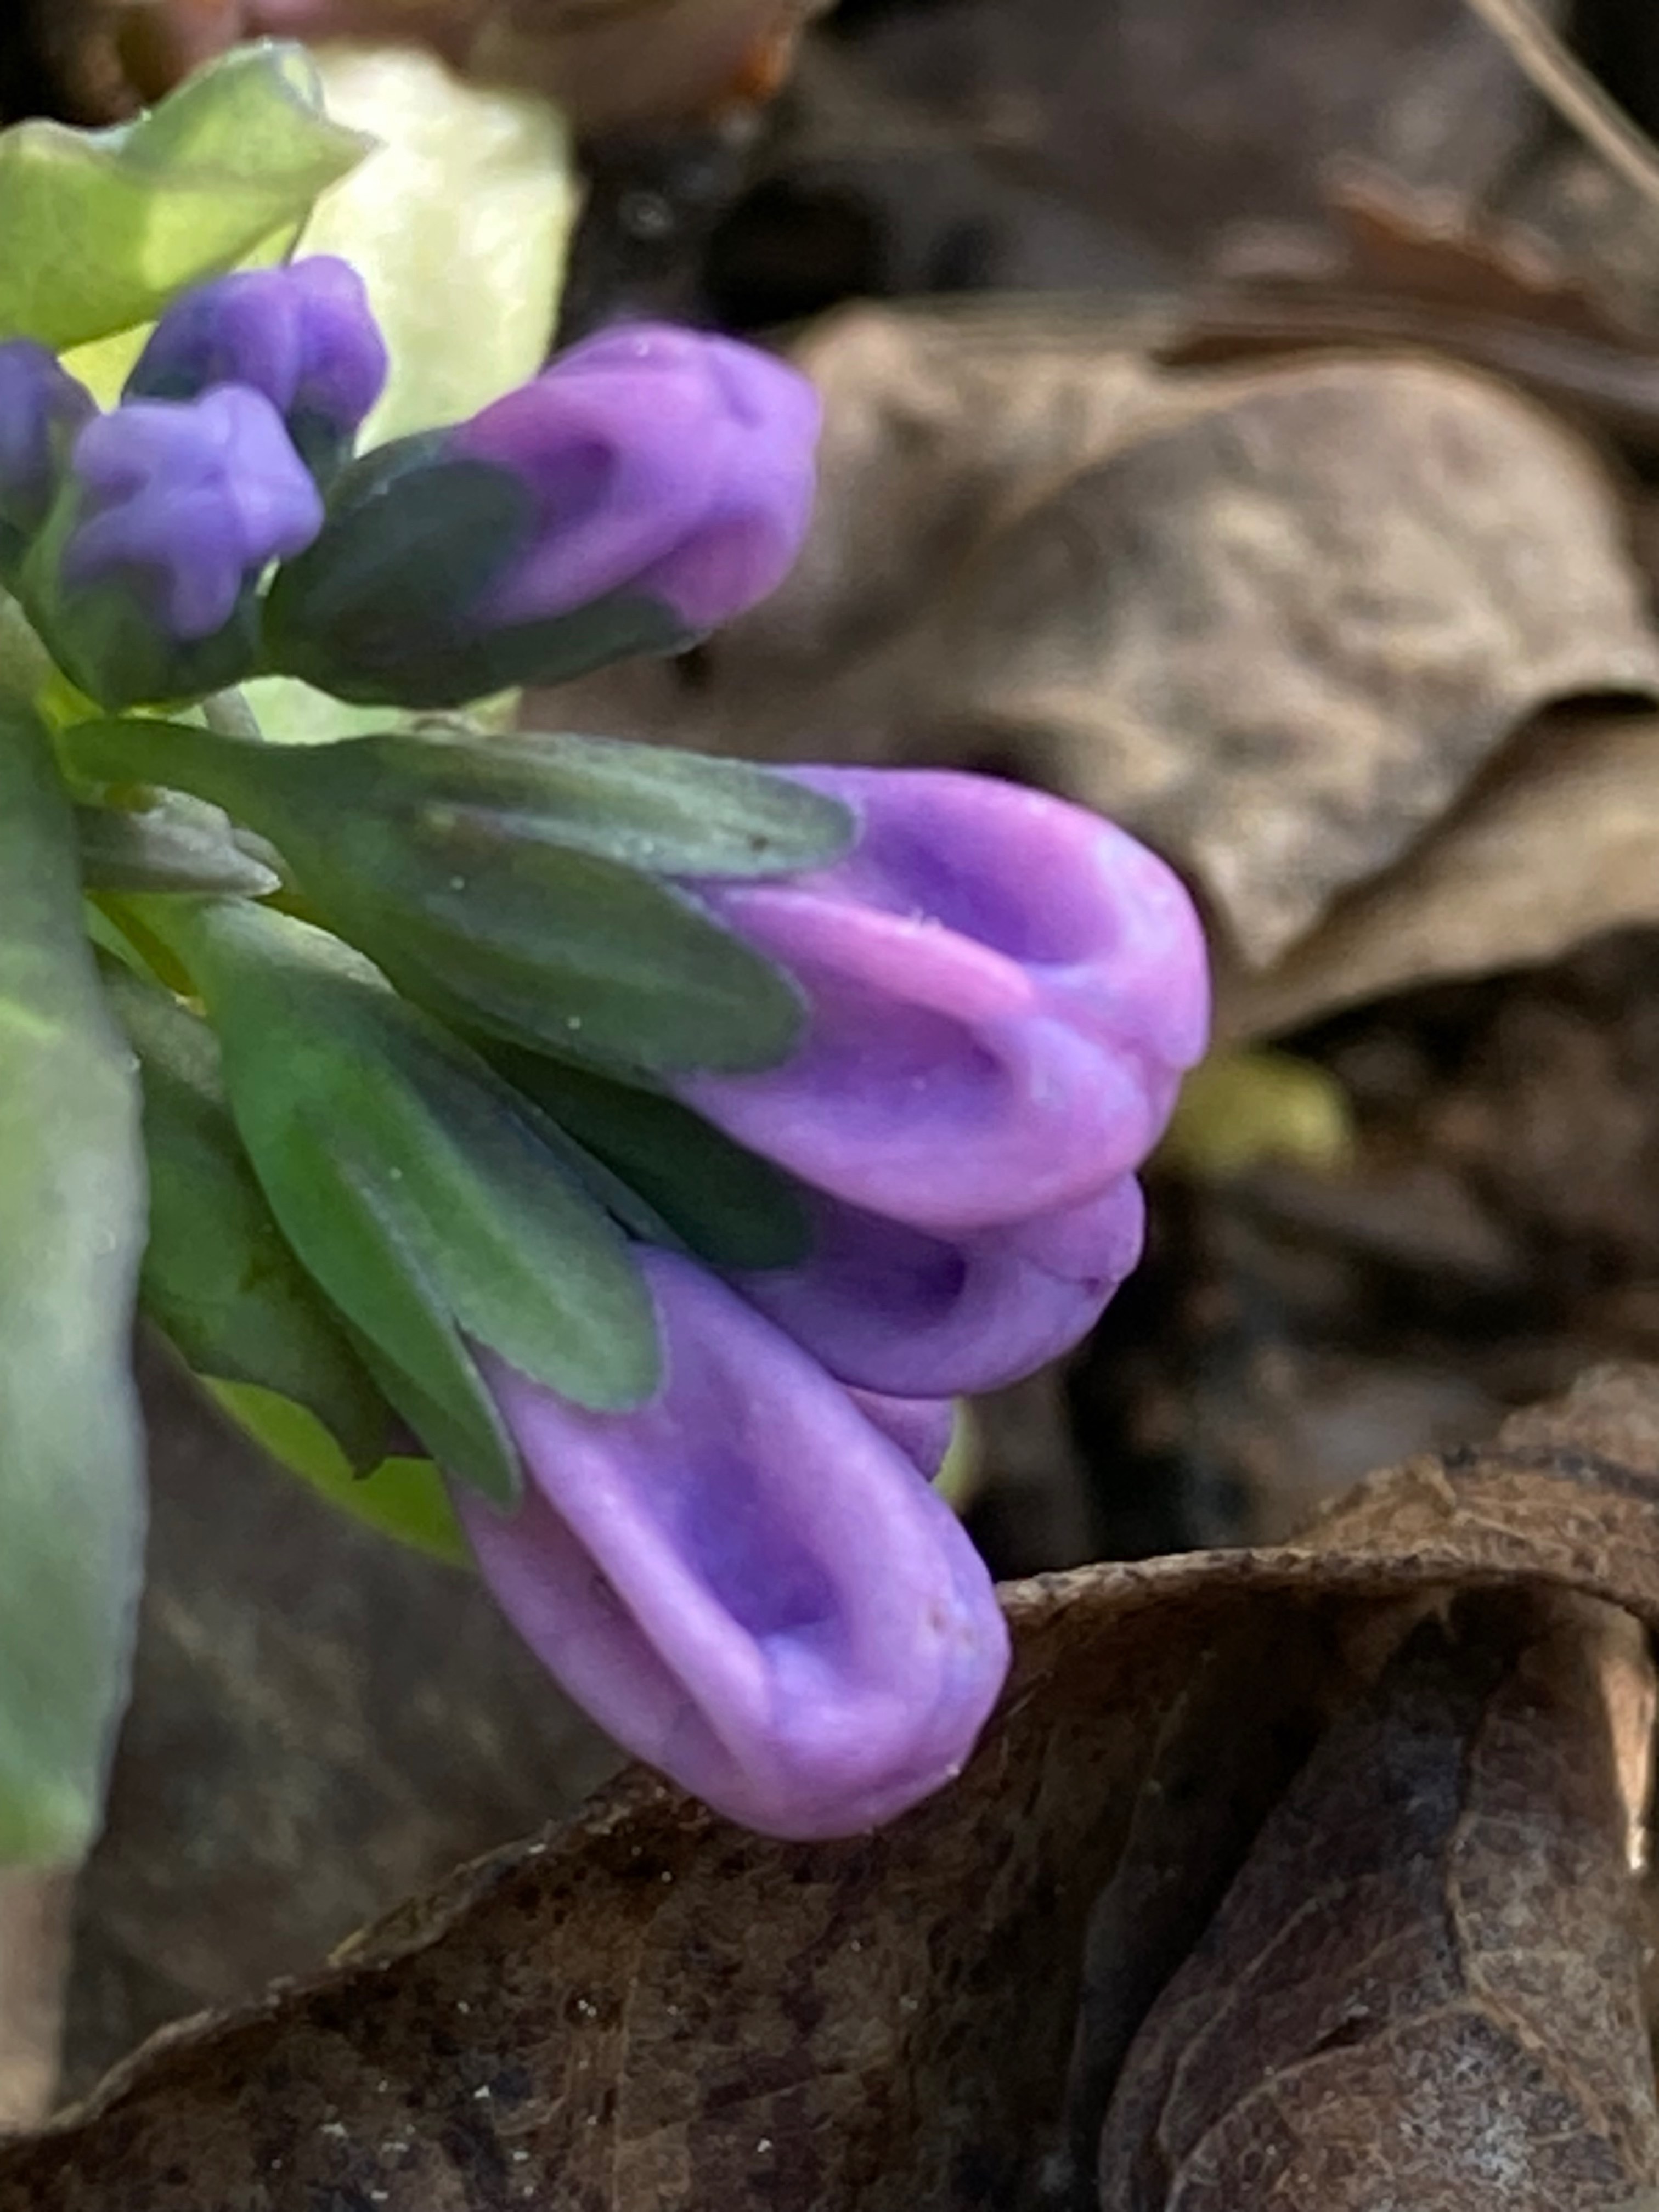 The Scientific Name is Mertensia virginica. You will likely hear them called Virginia Bluebells, Virginia Cowslip. This picture shows the Even the buds are attractive! of Mertensia virginica